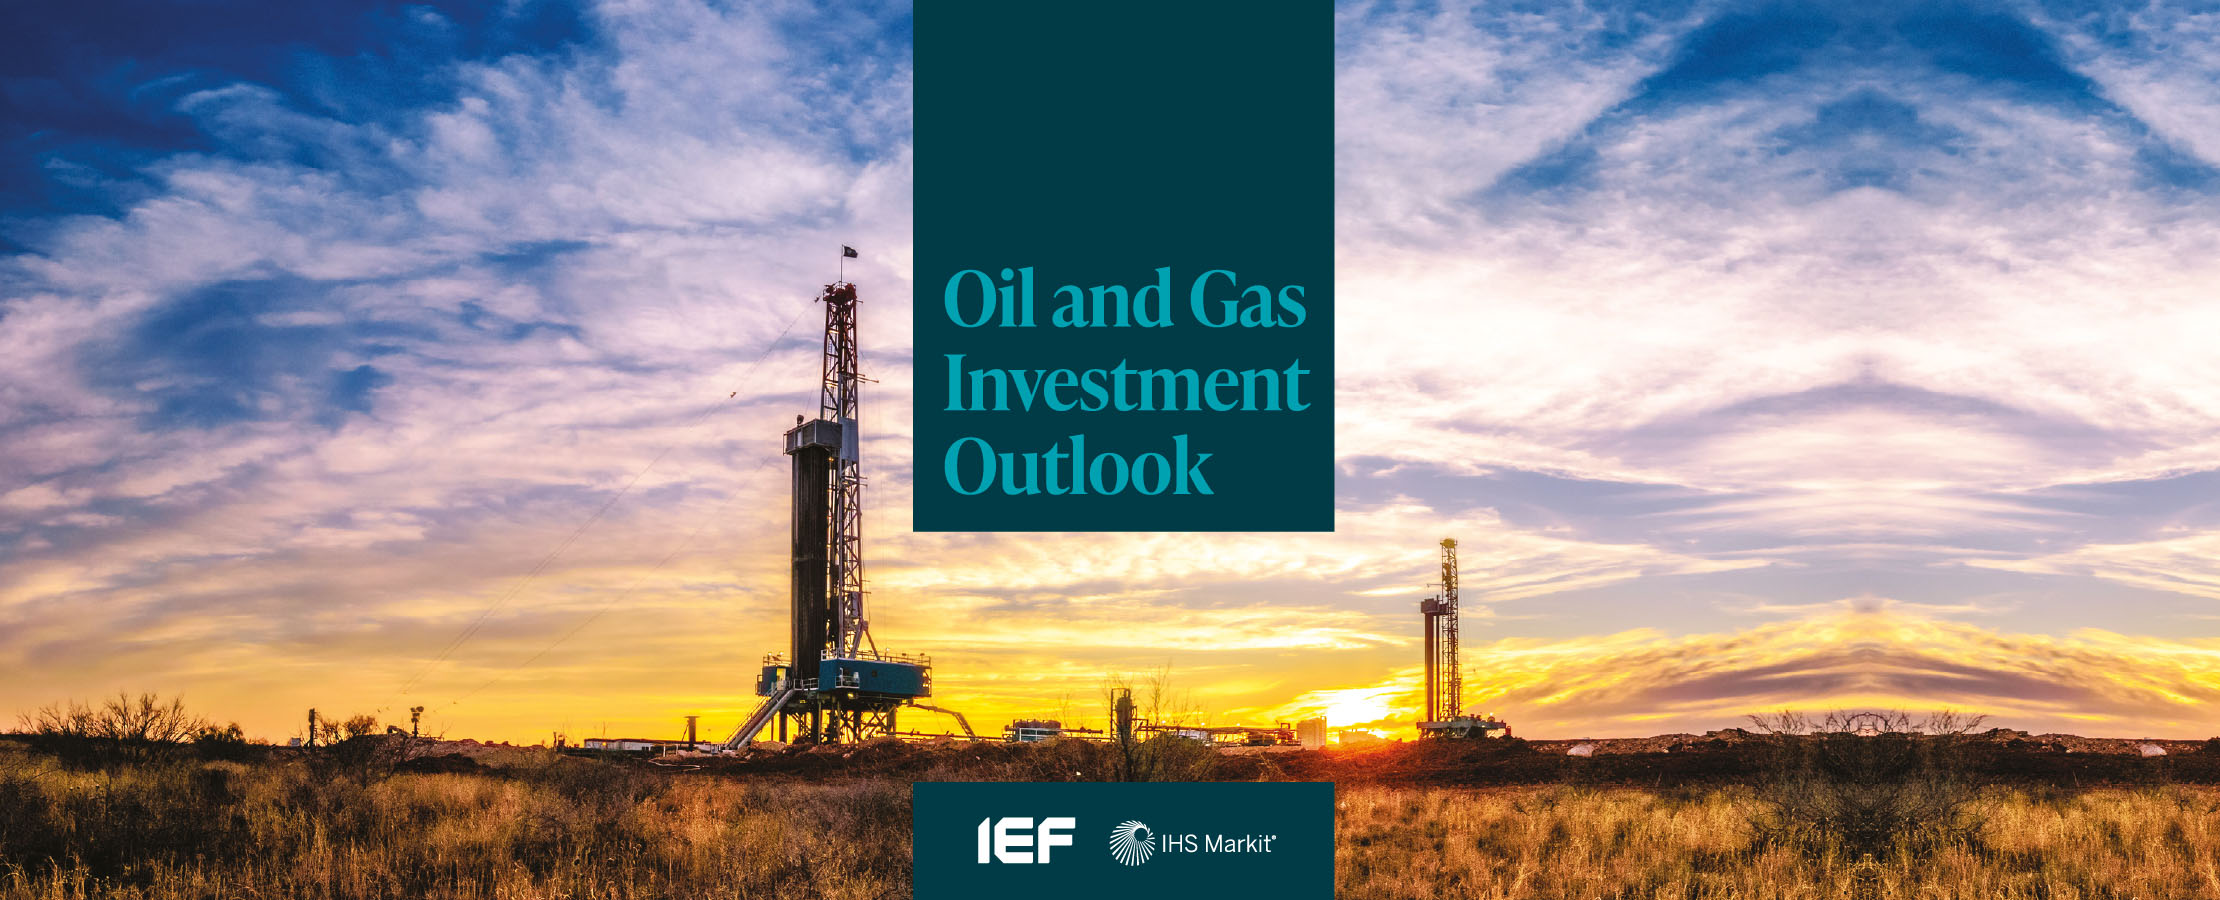 Oil and Gas Investment Outlook